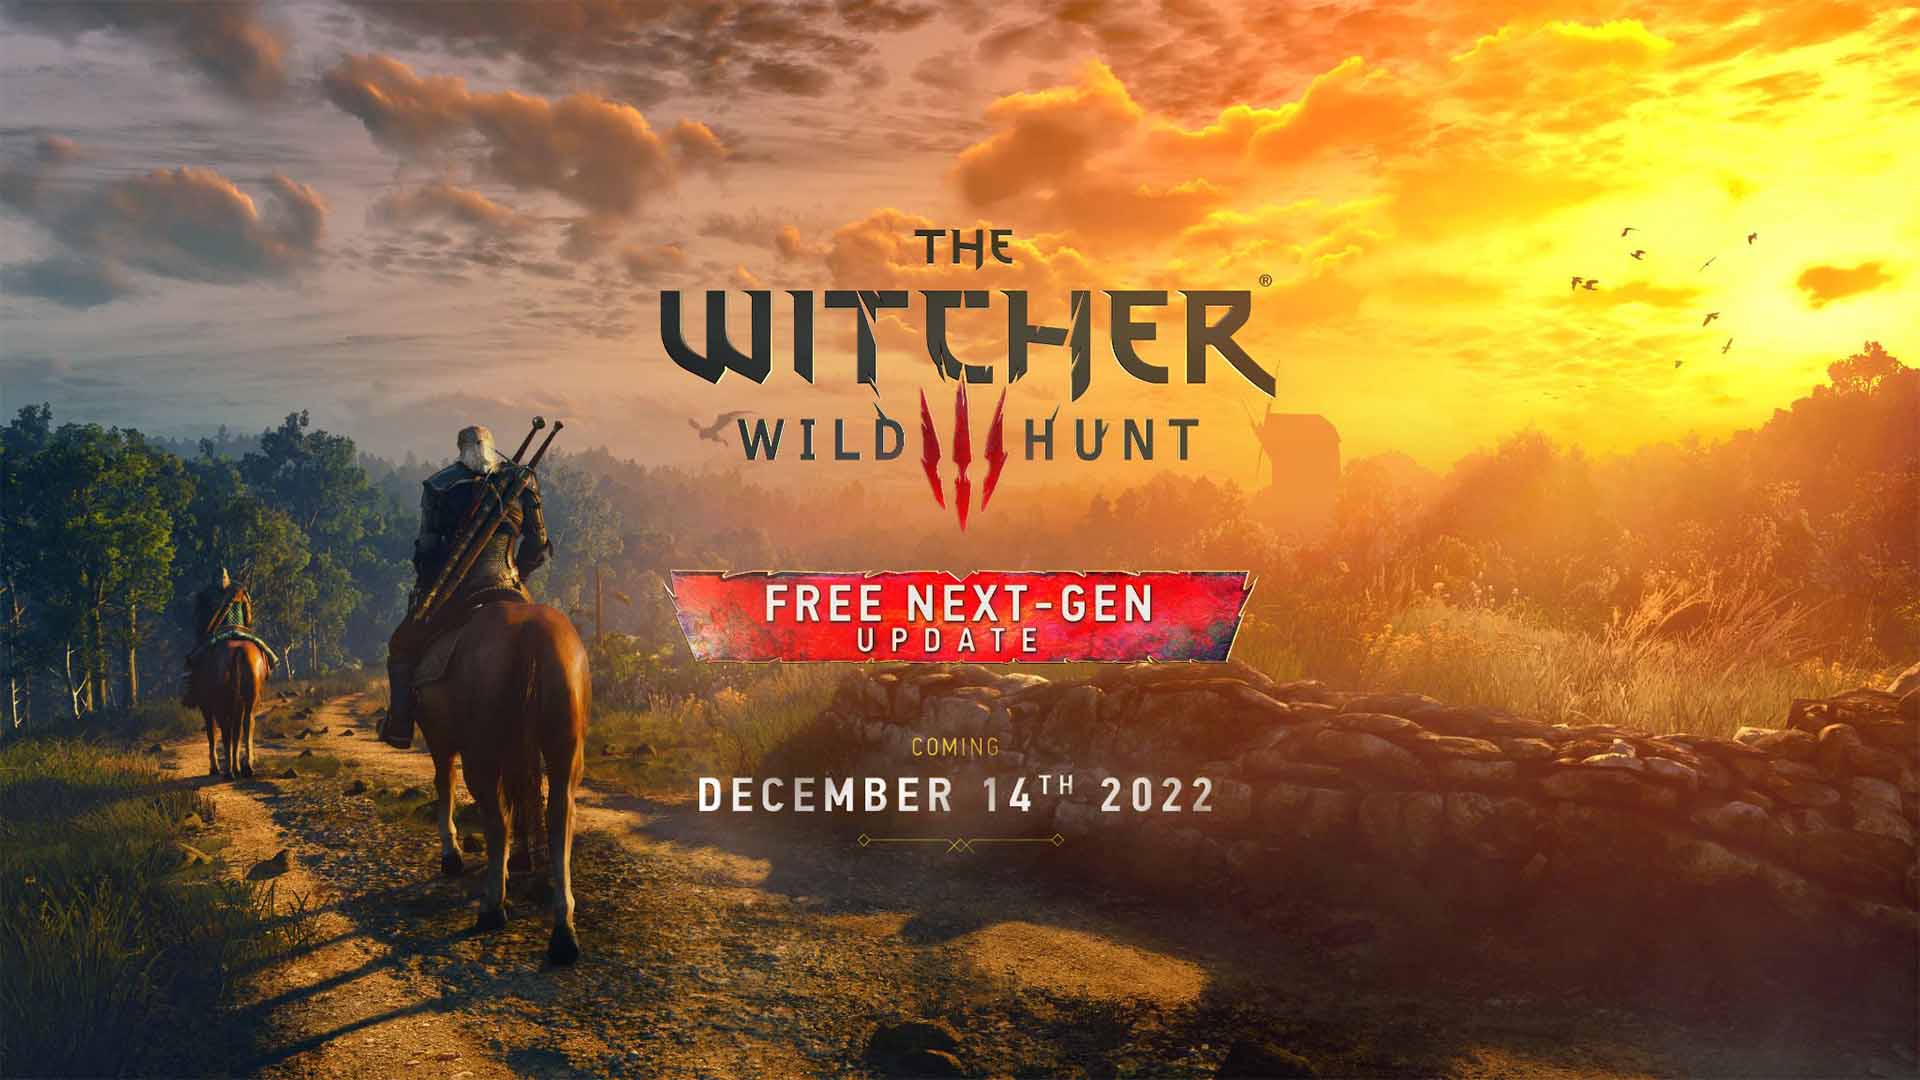 The Witcher 3 is coming to PS5 and Xbox Series X in December